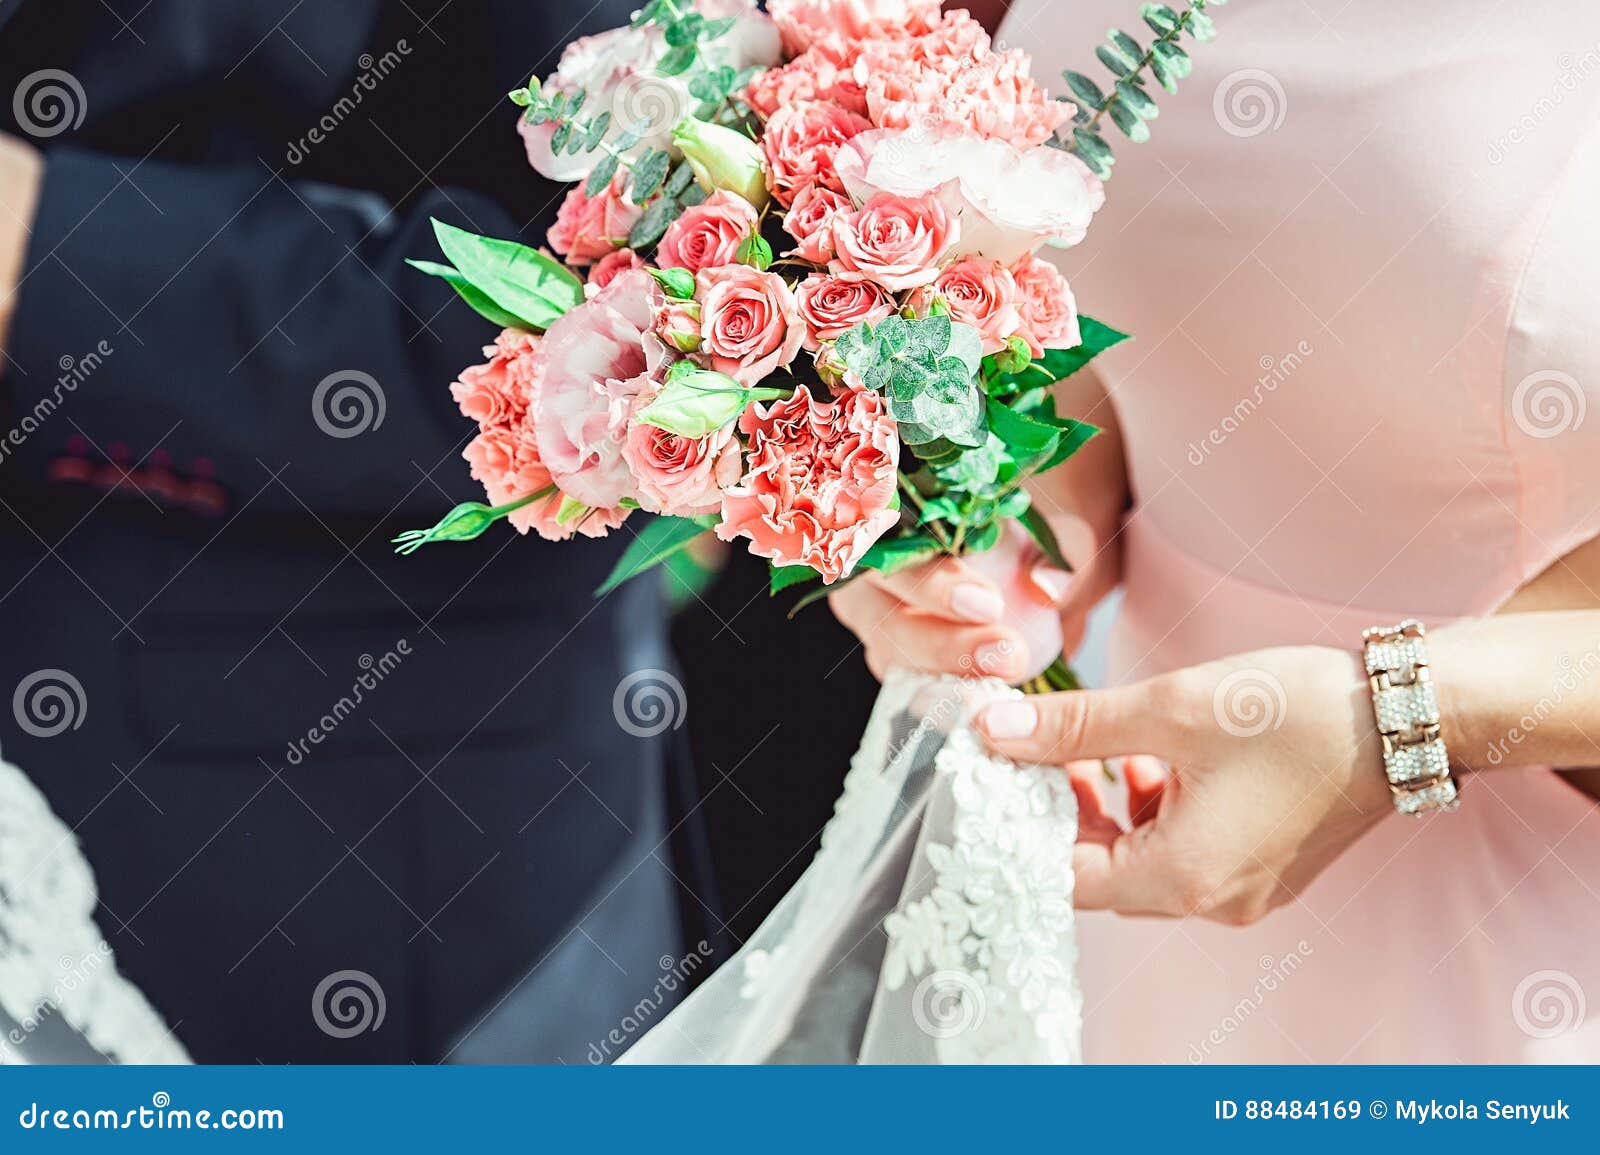 Woman in a Dress Holding Wedding Bouquets of White and Biege Roses ...